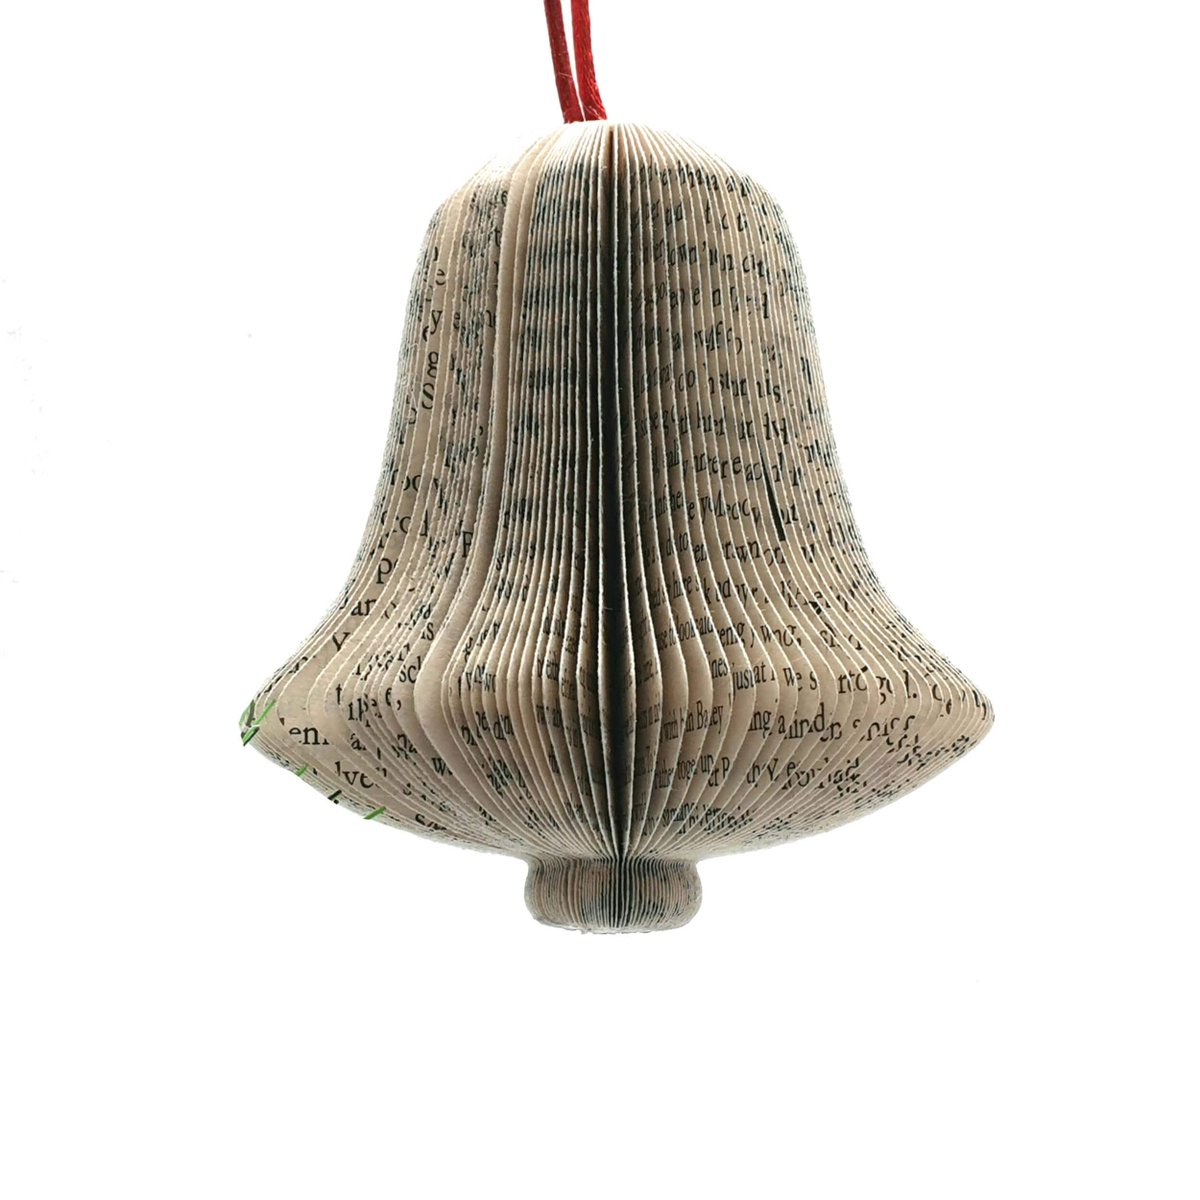 Hanging Bell Book Gift creatoncrafts.com/products/book-… #mhhsbd #Shopify #CreatonCrafts #PaperArt